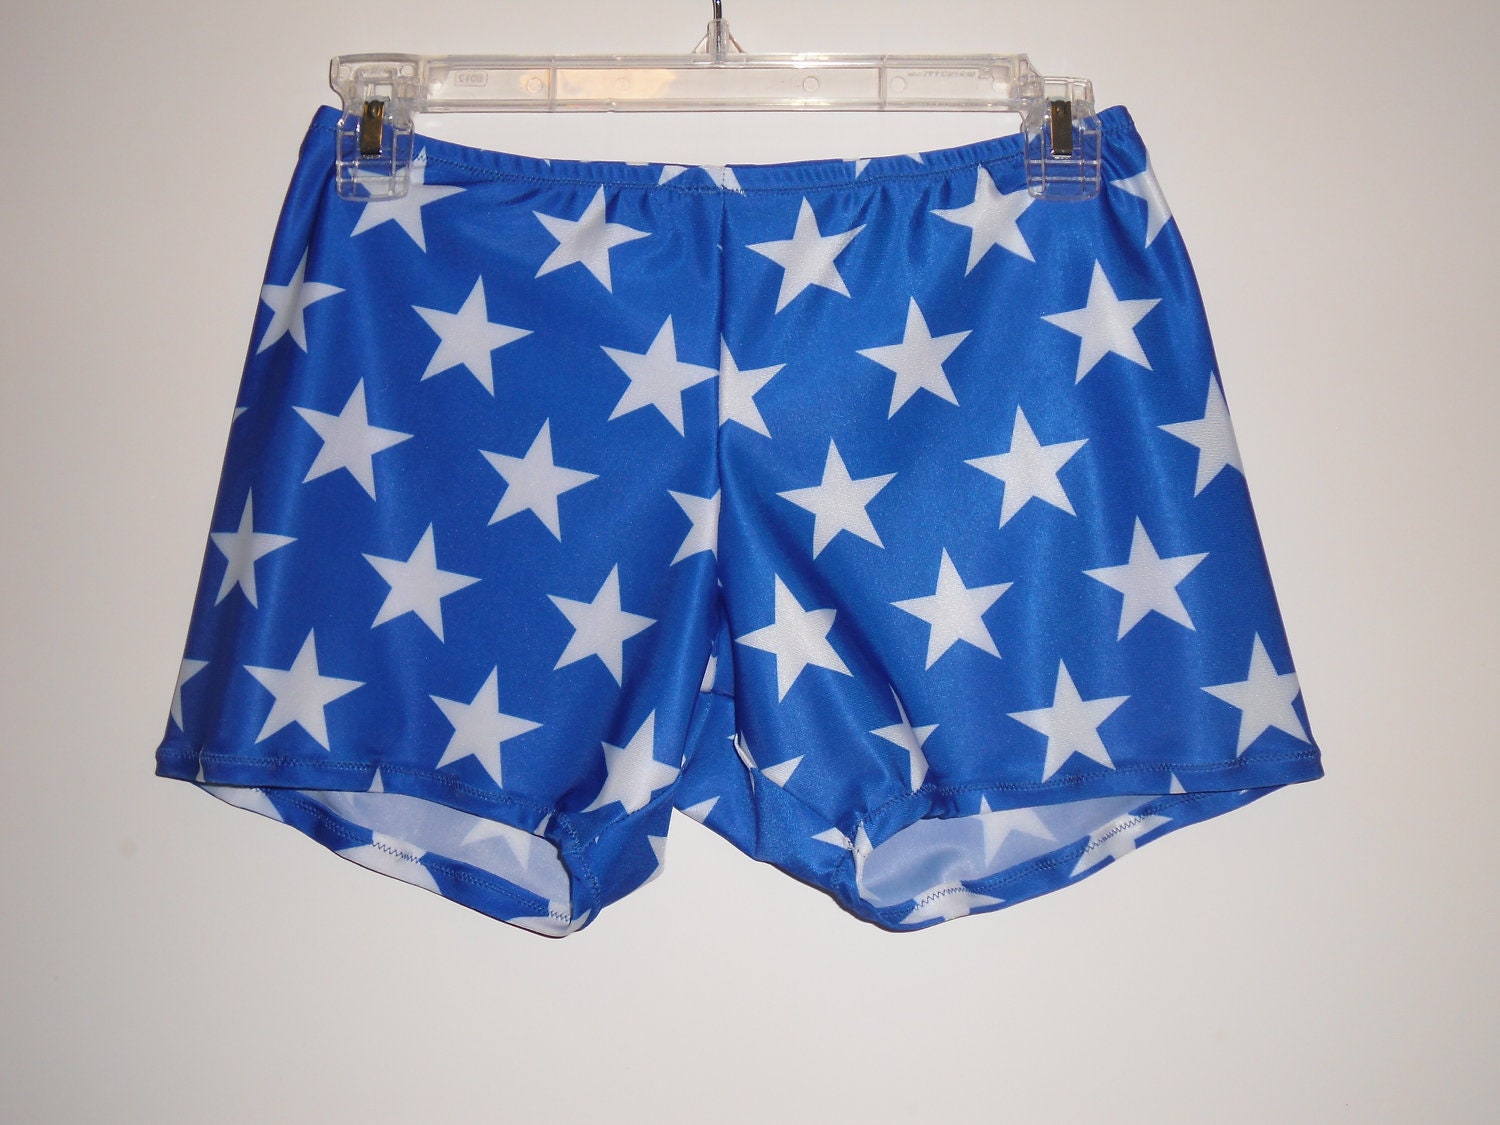 Spandex shorts in blue with white stars in any size